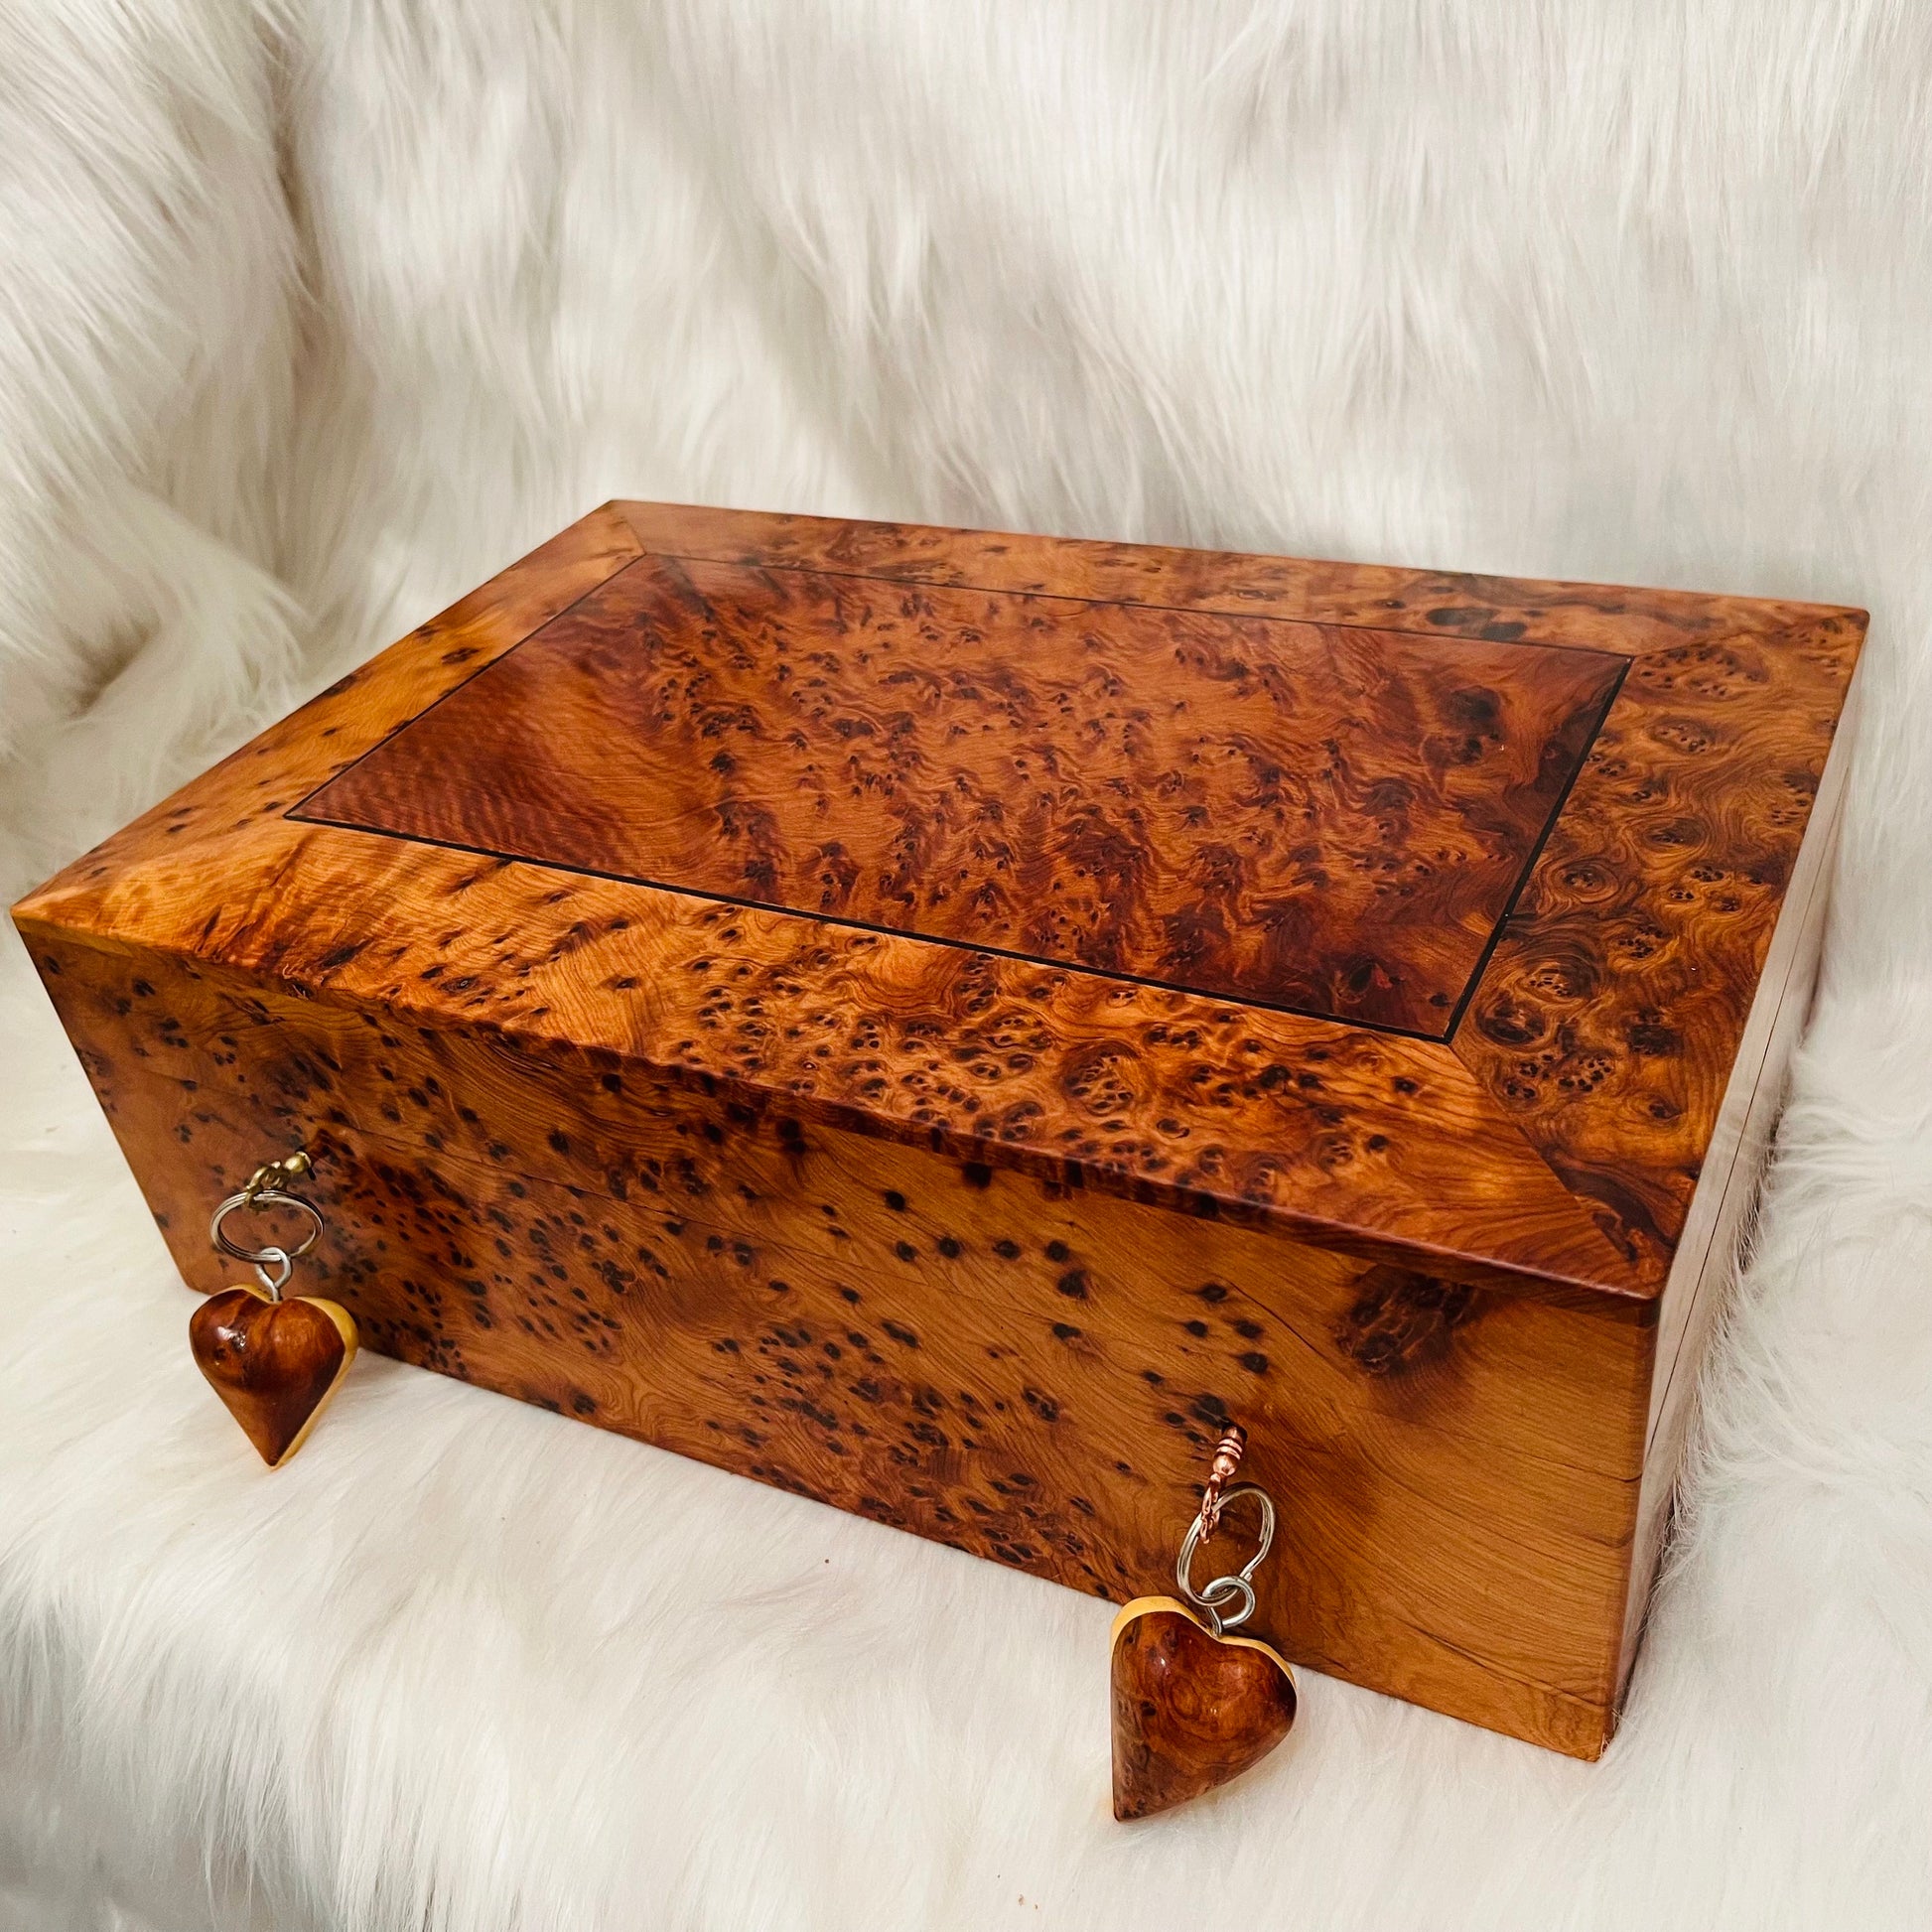 15"x10" Big Moroccan lockable Jewelry Box with Suede Leather Lining and Jewelry Cushions,Box organizer with 2 keys,wedding couple memory box